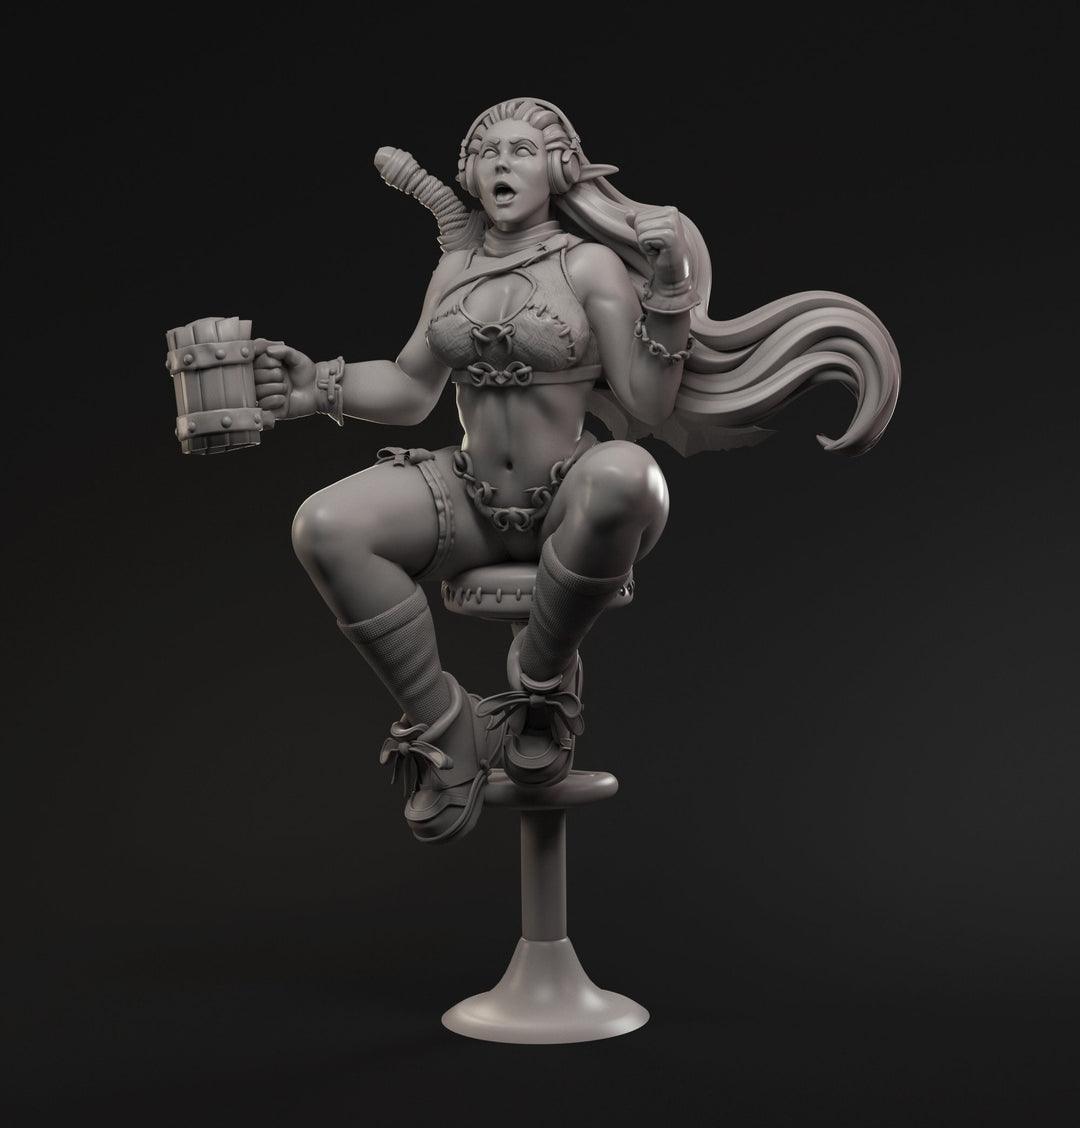 Cheerleader - 32mm 54mm 75mm Pinup | DnD Miniature | Dungeons and Dragons | Tabletop | Pathfinder | Role Playing